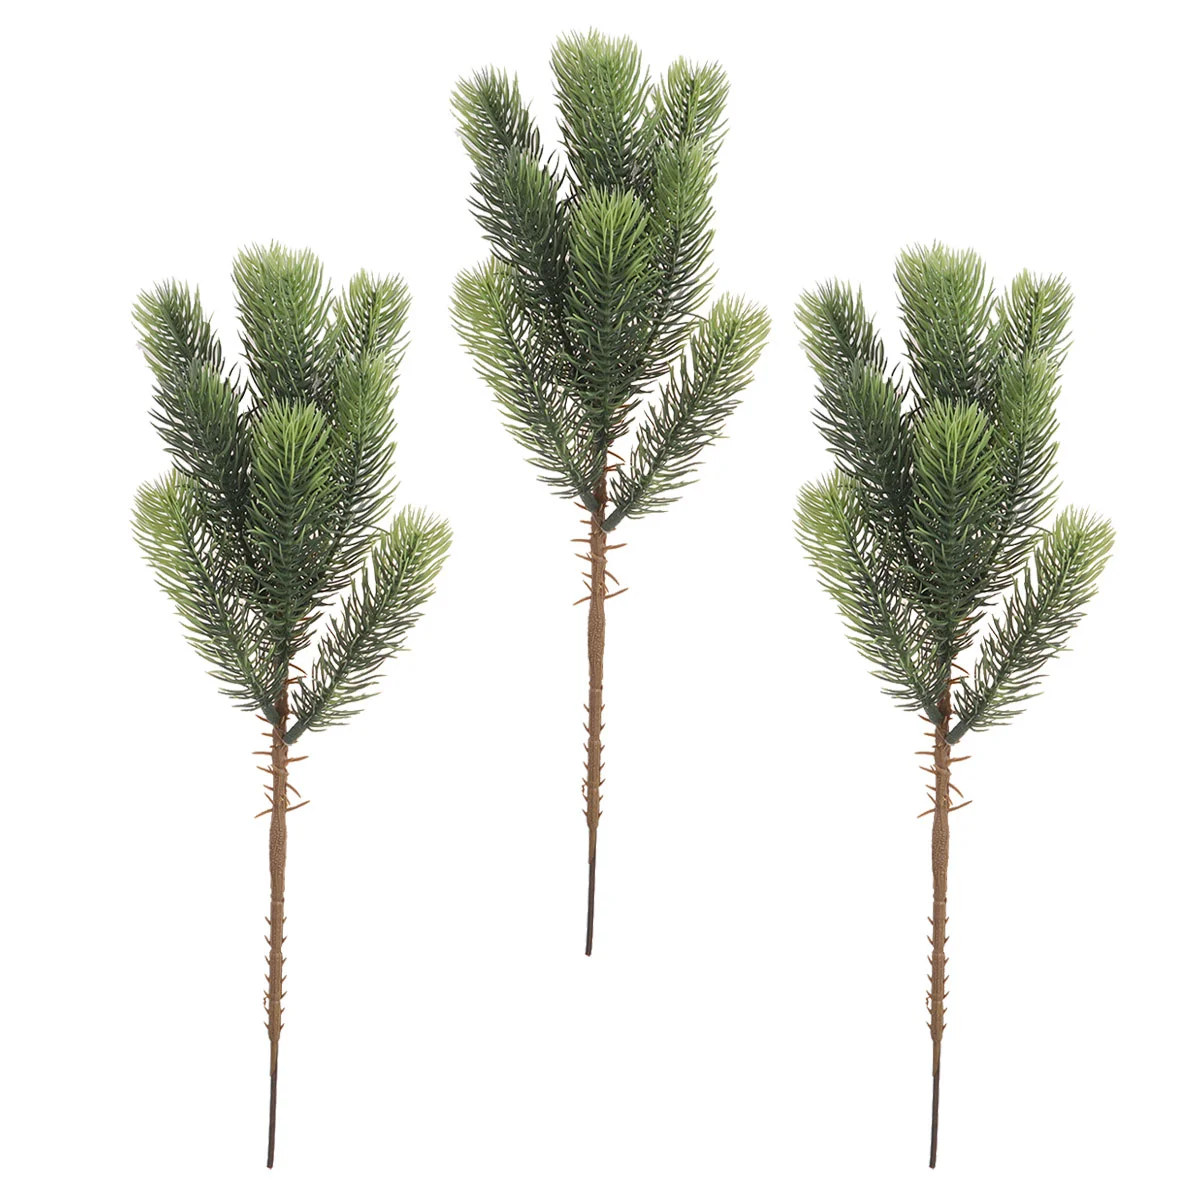 

3pcs Christmas Simulated Leaves Fake Flower Leaves for Home Office Restaurant Decor (Small Pine Leaf Branch Green)